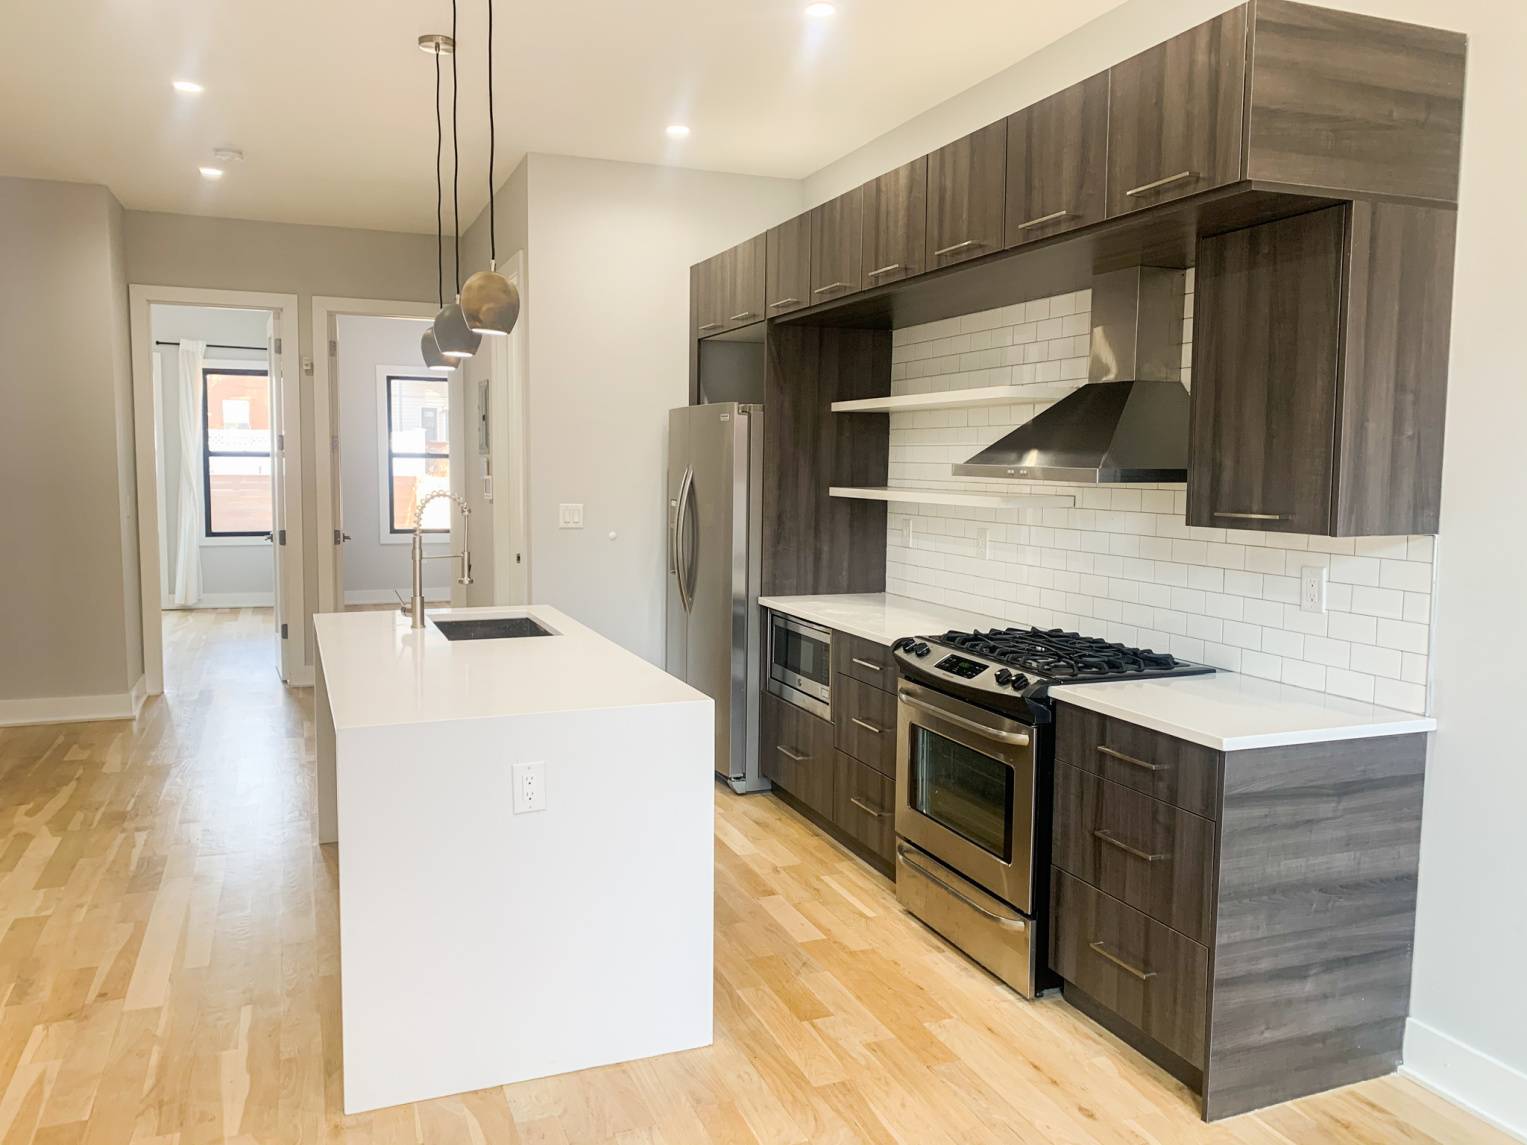 No Fee ! Beautifully renovated apartment that features brand new kitchen, central AC and backyard.